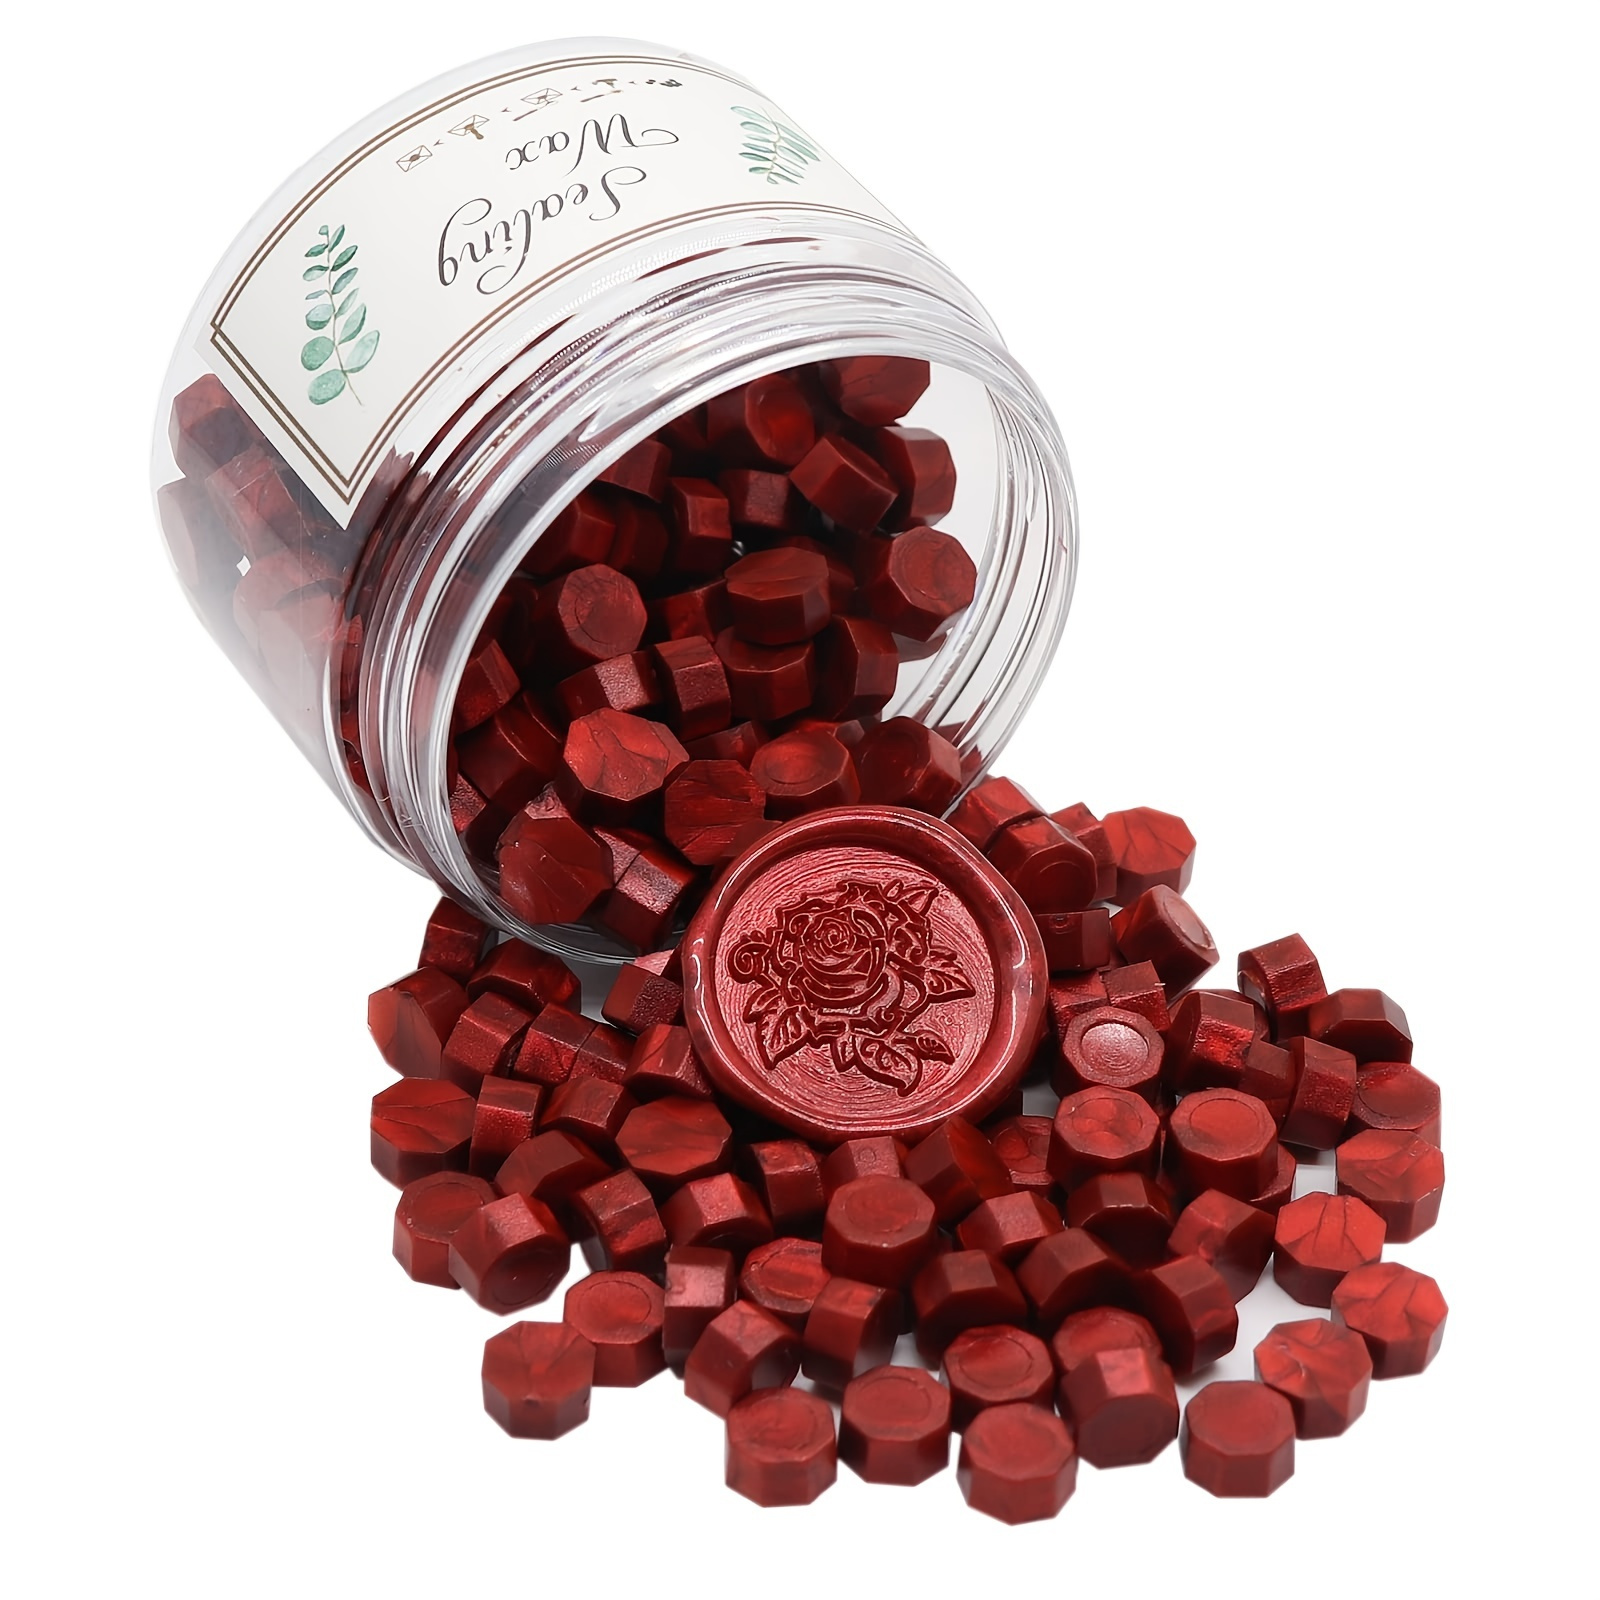  Cutecatwing 200pcs Metallic Burgundy Sealing Wax Beads Wine Red  Octagon Wax Seal Bead for Sealing Stamp Wedding Invitations Cards Letter  Envelopes Wine Packages : Arts, Crafts & Sewing